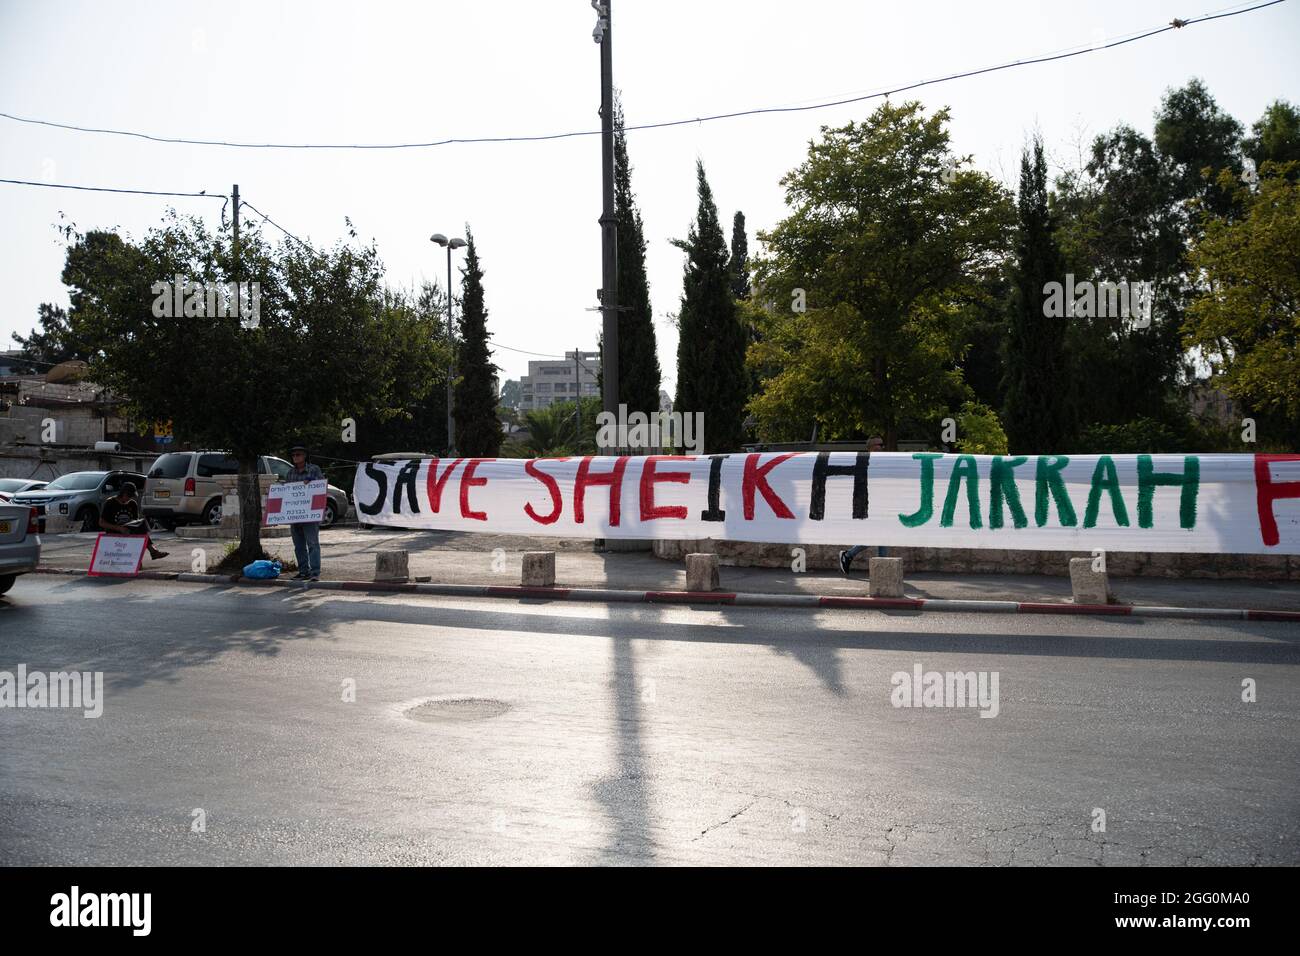 Jewish and Palestinian protestors in Sheikh Jarach during the weekly protest in front of the Israeli Police checkpoint at the entrance to the neigberhood - which is monitoring entrance of non-residents since last April. Sheikh Jarach. Jerusalem, Israel. 28th Aug 2021. (Photo by Matan Golan/Alamy Live News) Stock Photo